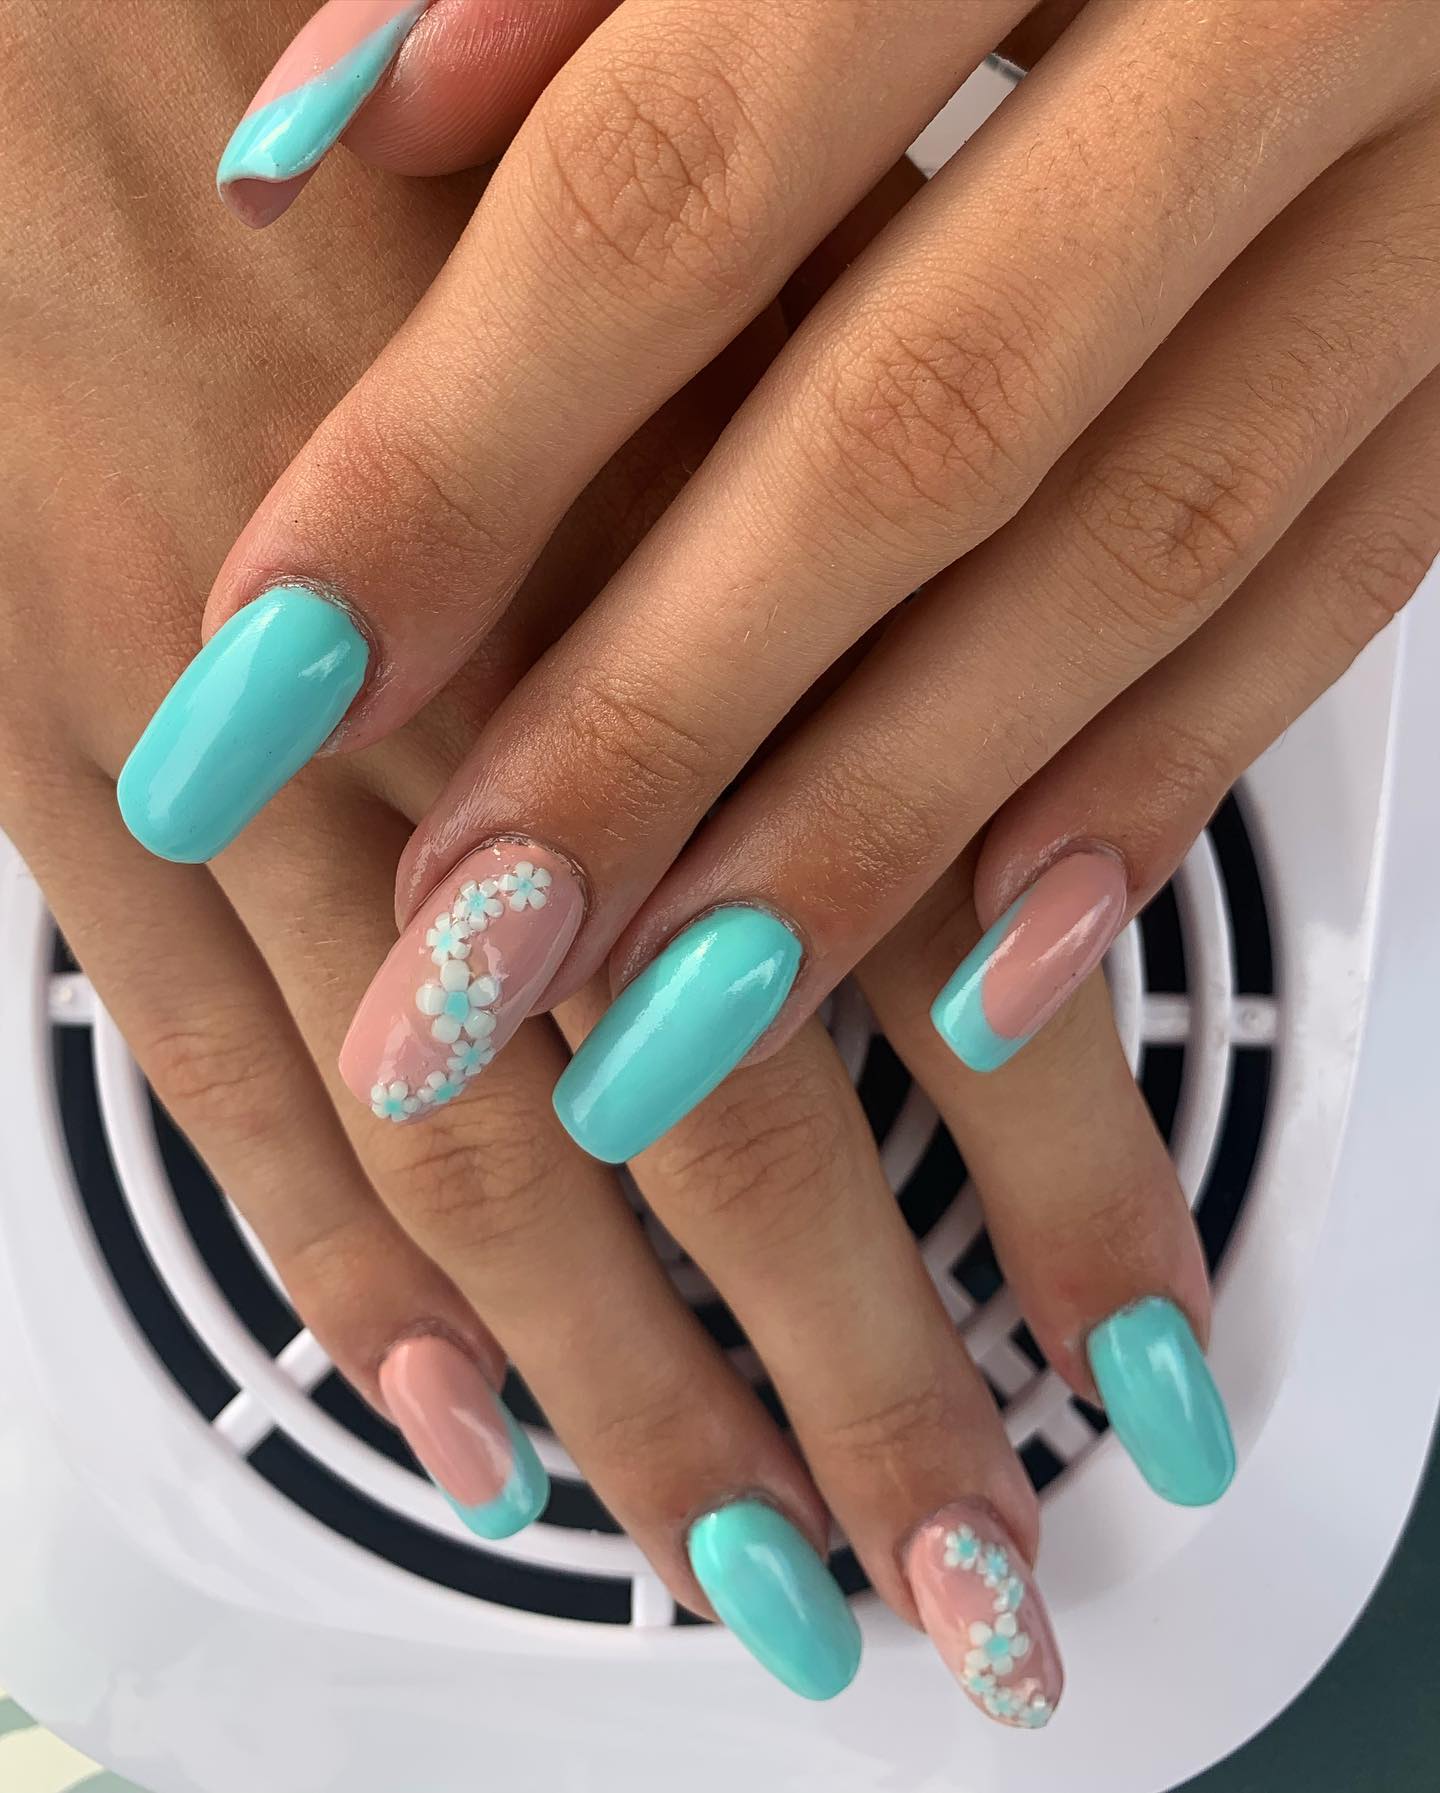 Floral nail designs are always nice to try on. If you agree with me, why don't you try this nail art?